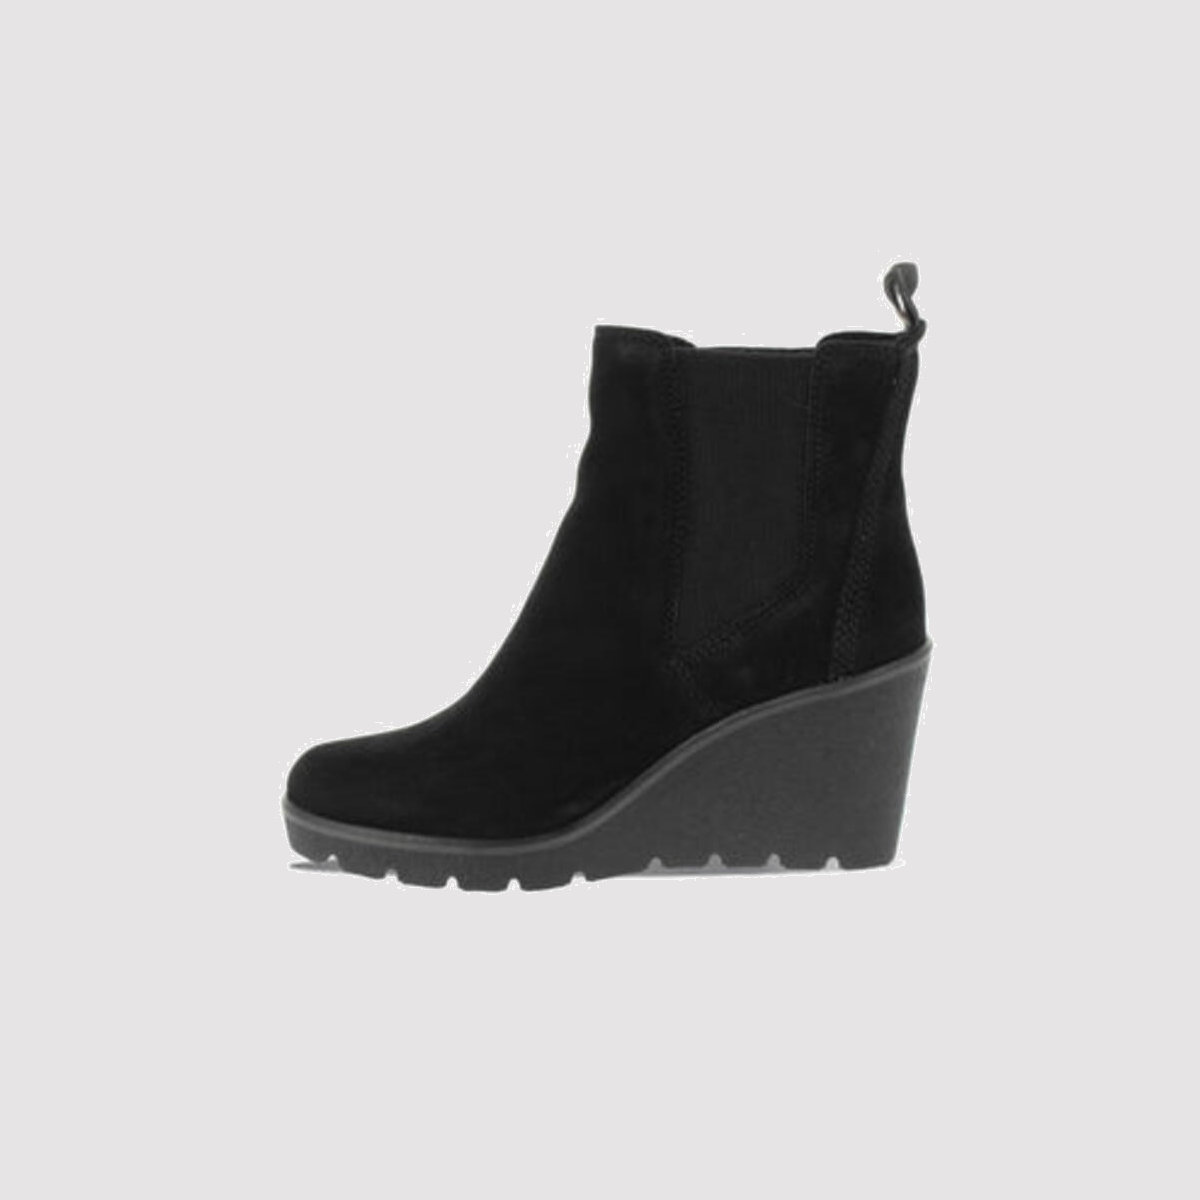 Timberland Paris Height Double Gore Women's Chelsea Boots